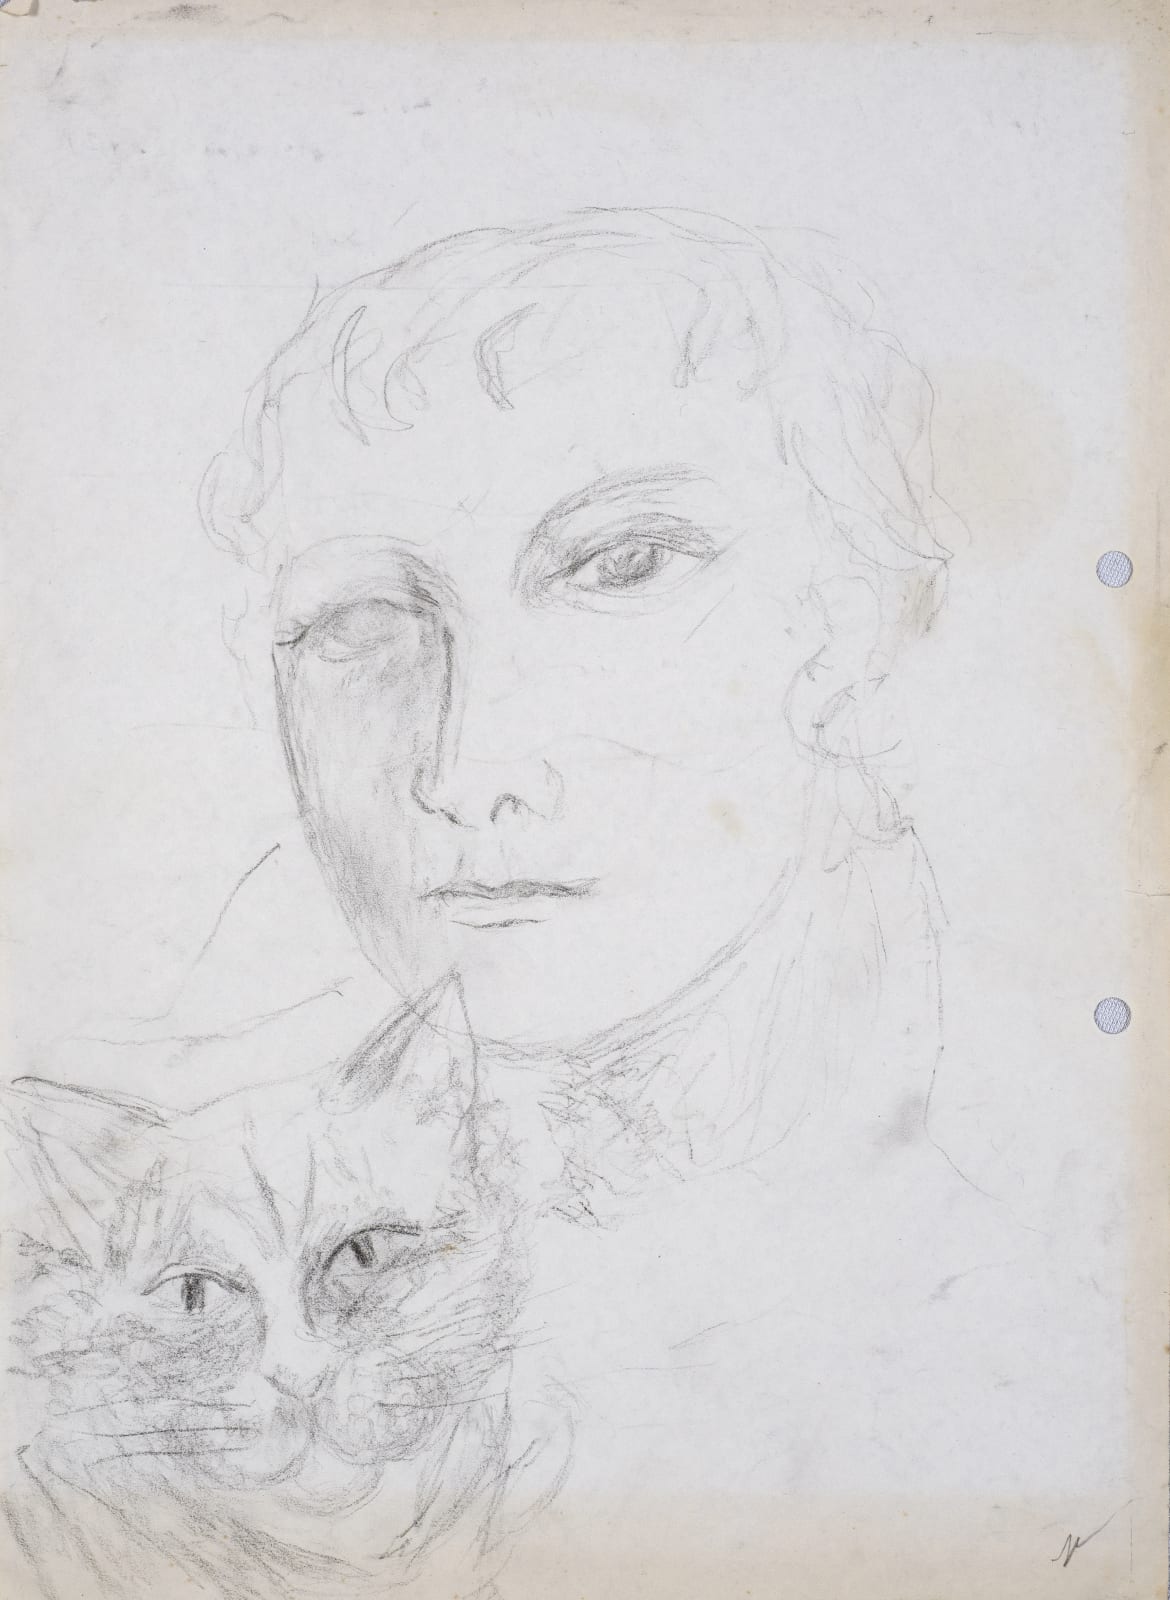 Marevna (Marie Vorobieff-Stebelska) (1892-1984) Portrait Sketch of Marc Chagall with Cat n.d. Pencil on paper 29.2 x 20.5 cm Ben Uri Collection © Marevna estate To see and discover more about this artist click here